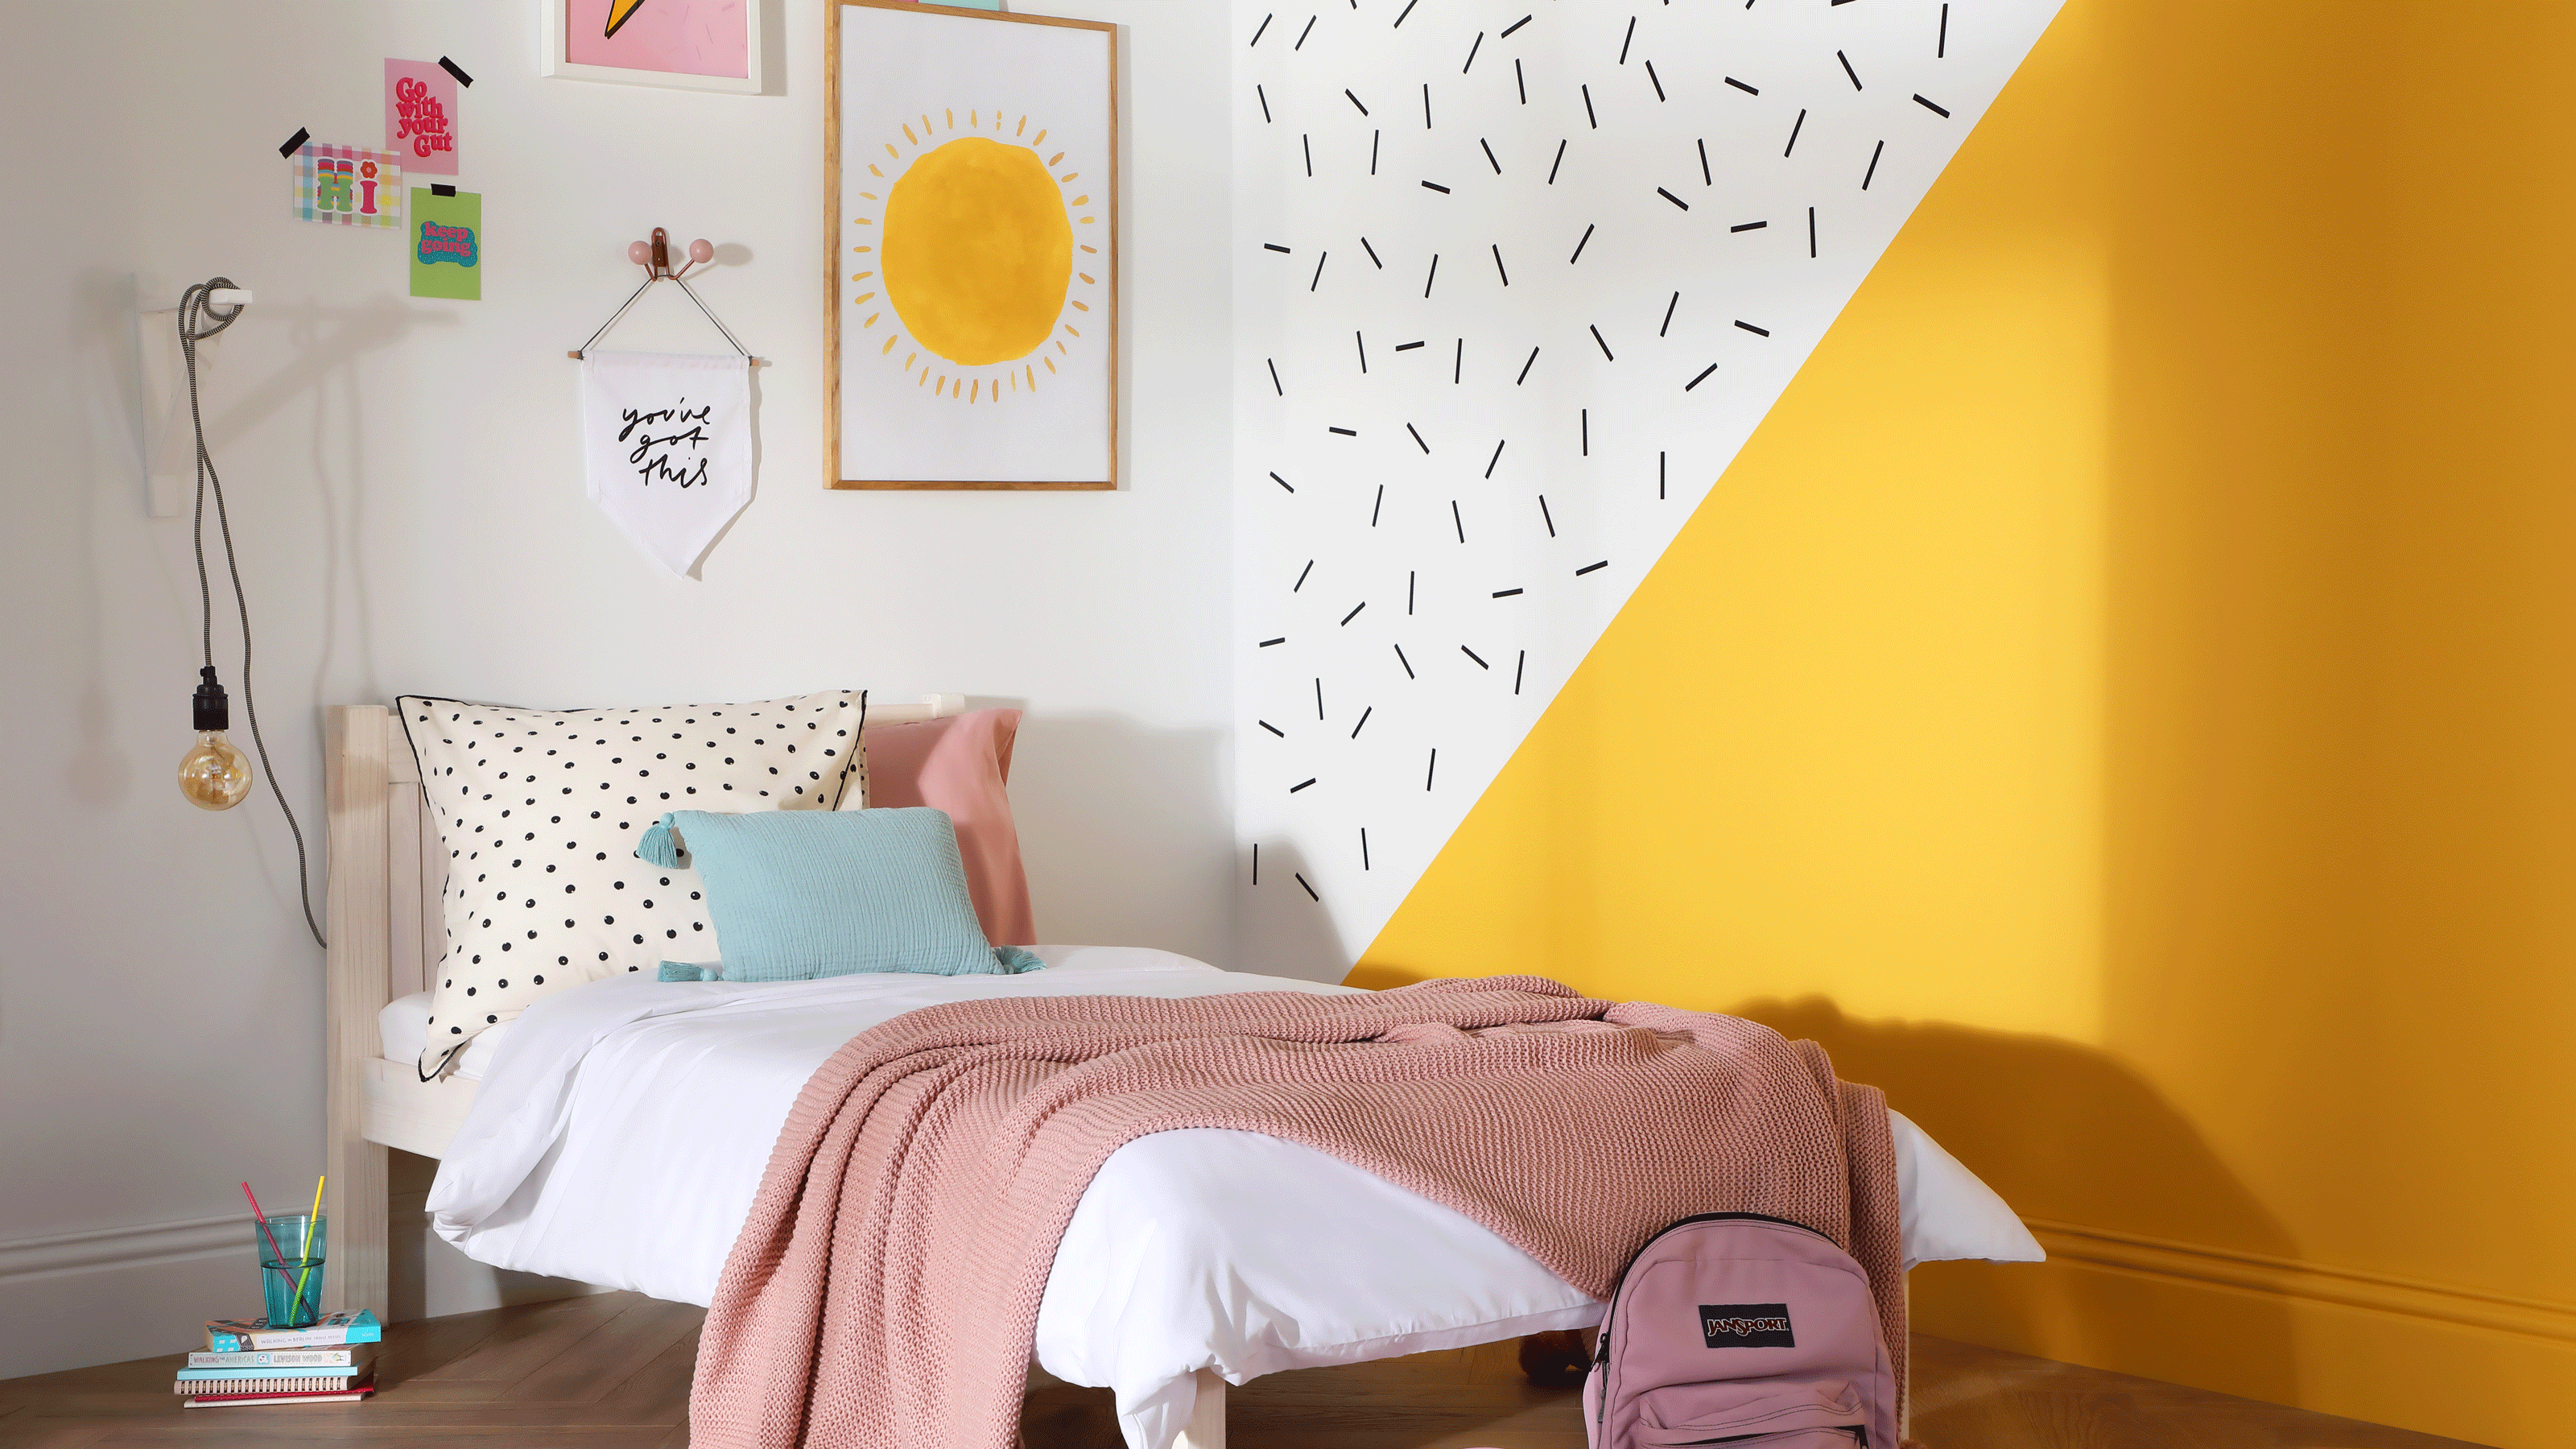 Kid's bedroom with color painted zones and washi tape decor on walls.